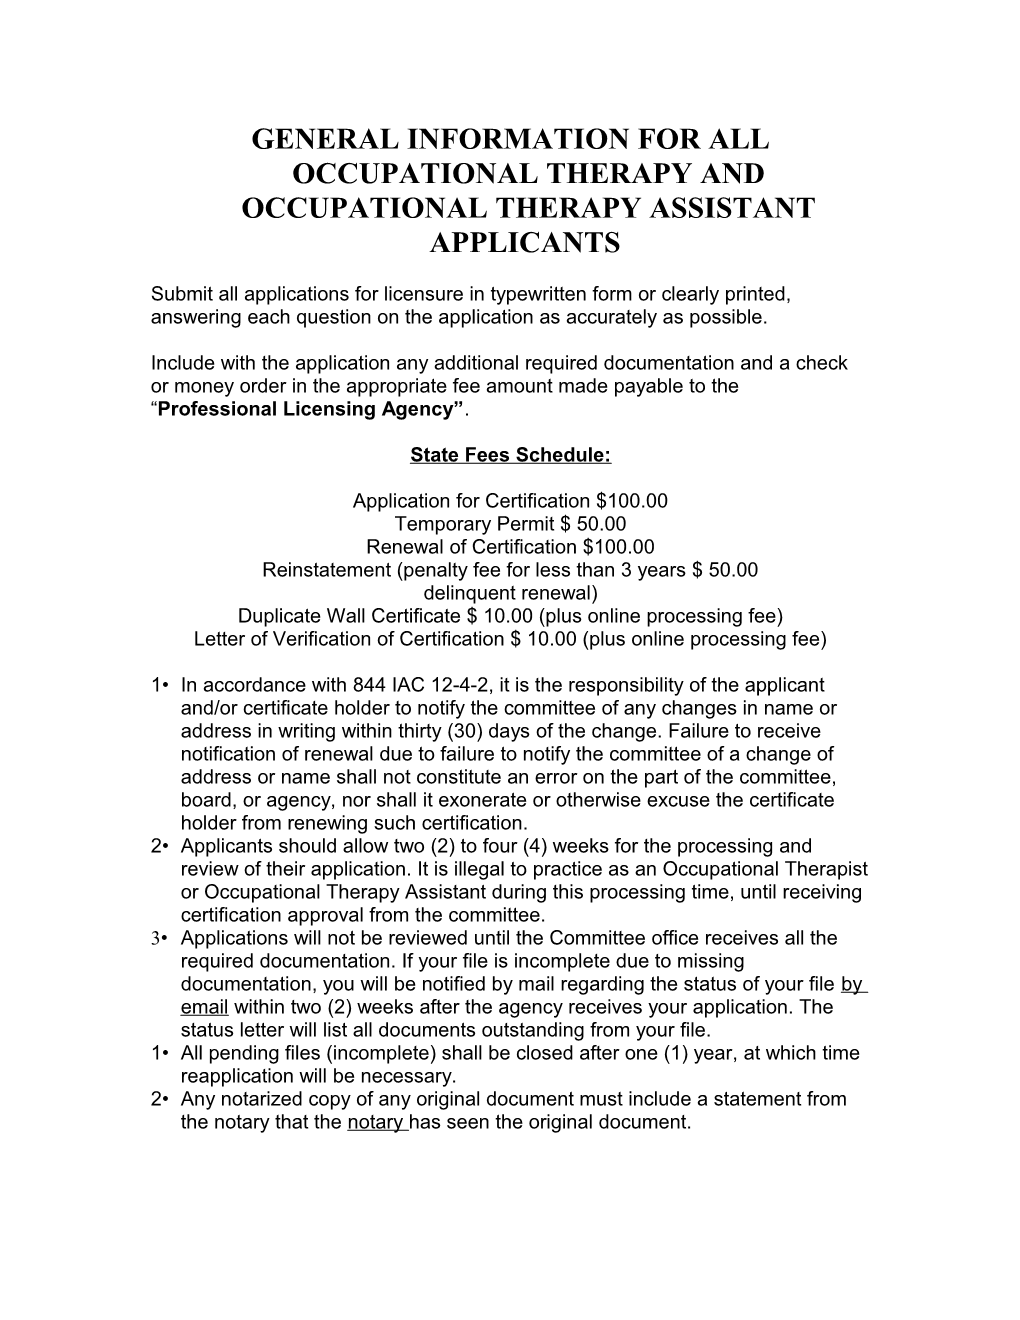 General Information for All Occupational Therapy and Occupational Therapy Assistant Applicants